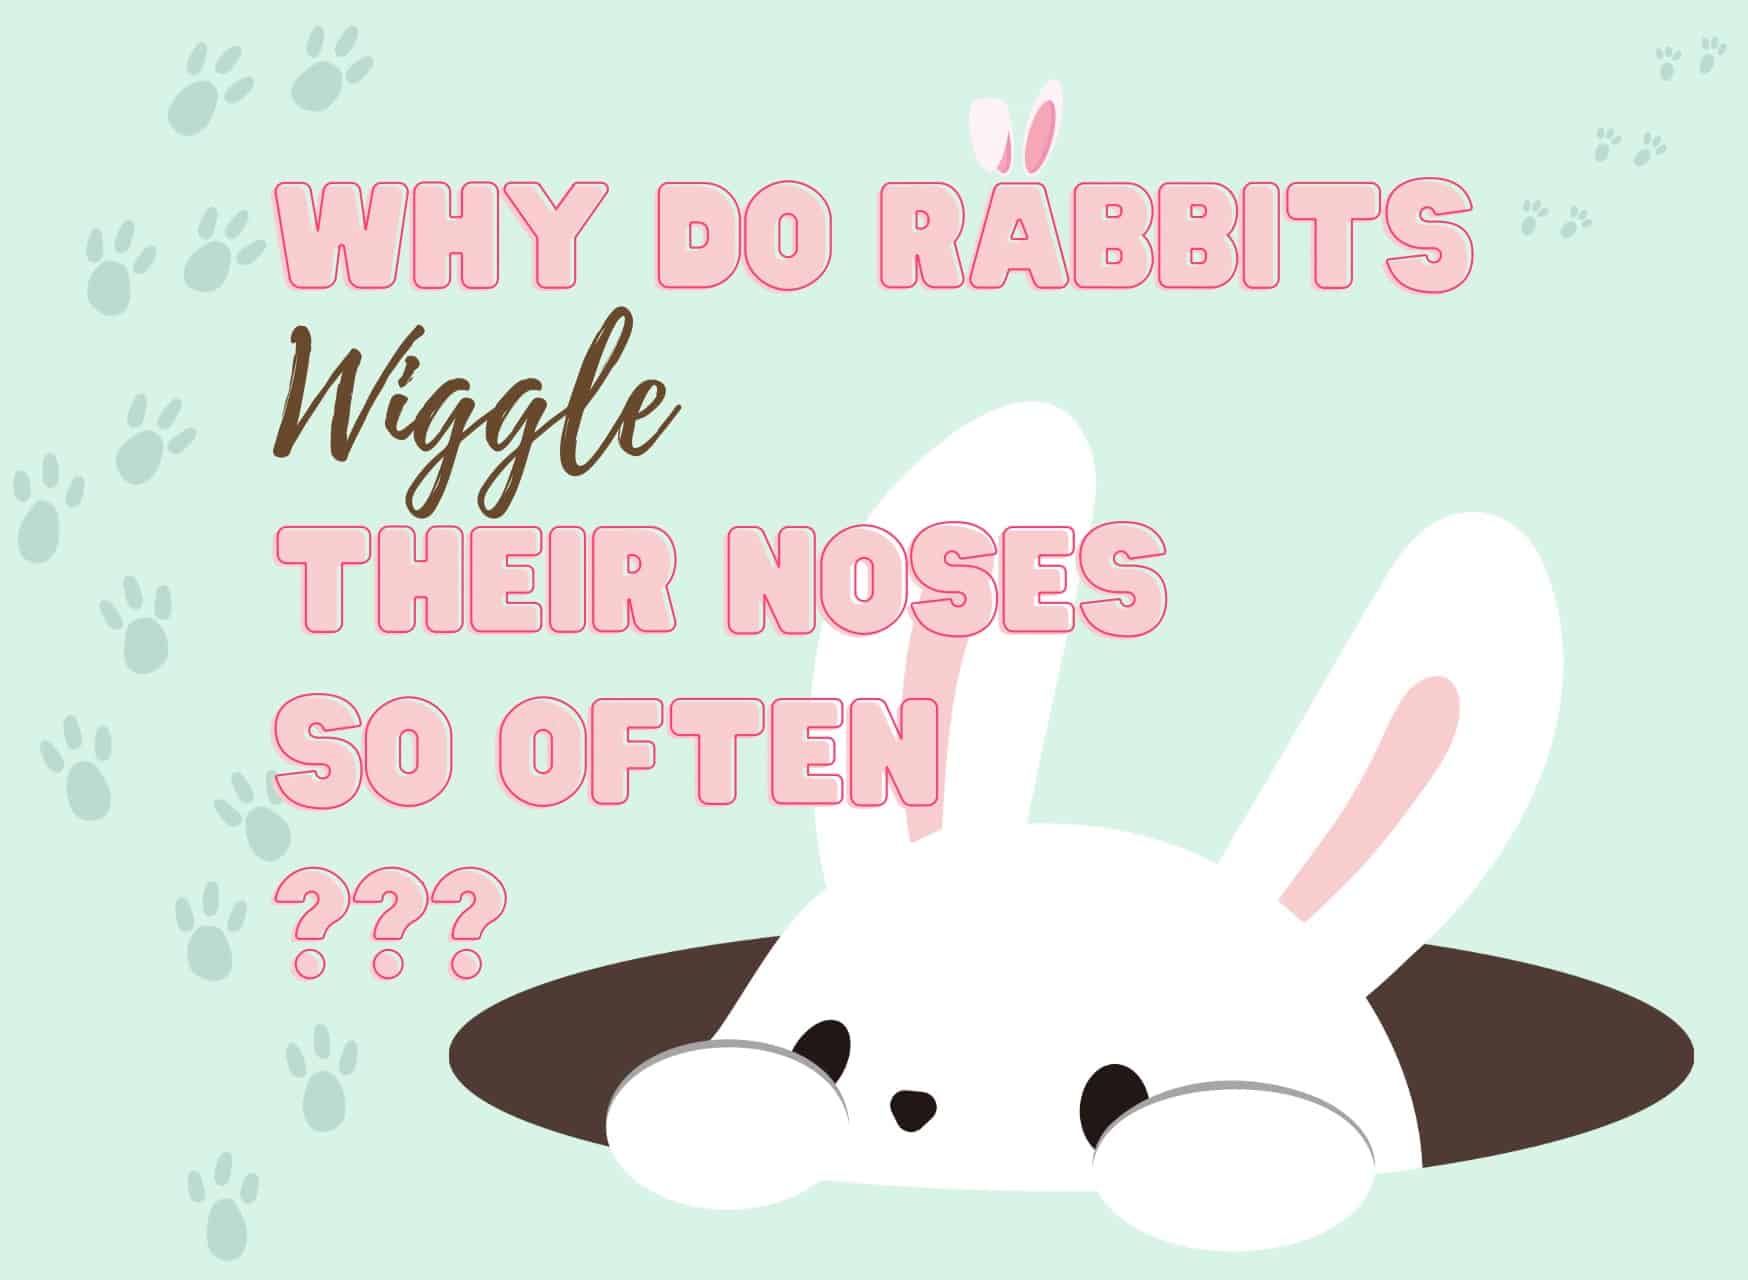 Why do rabbits wiggle their noses , bunny nose twitching , bunny nose, nose twitching